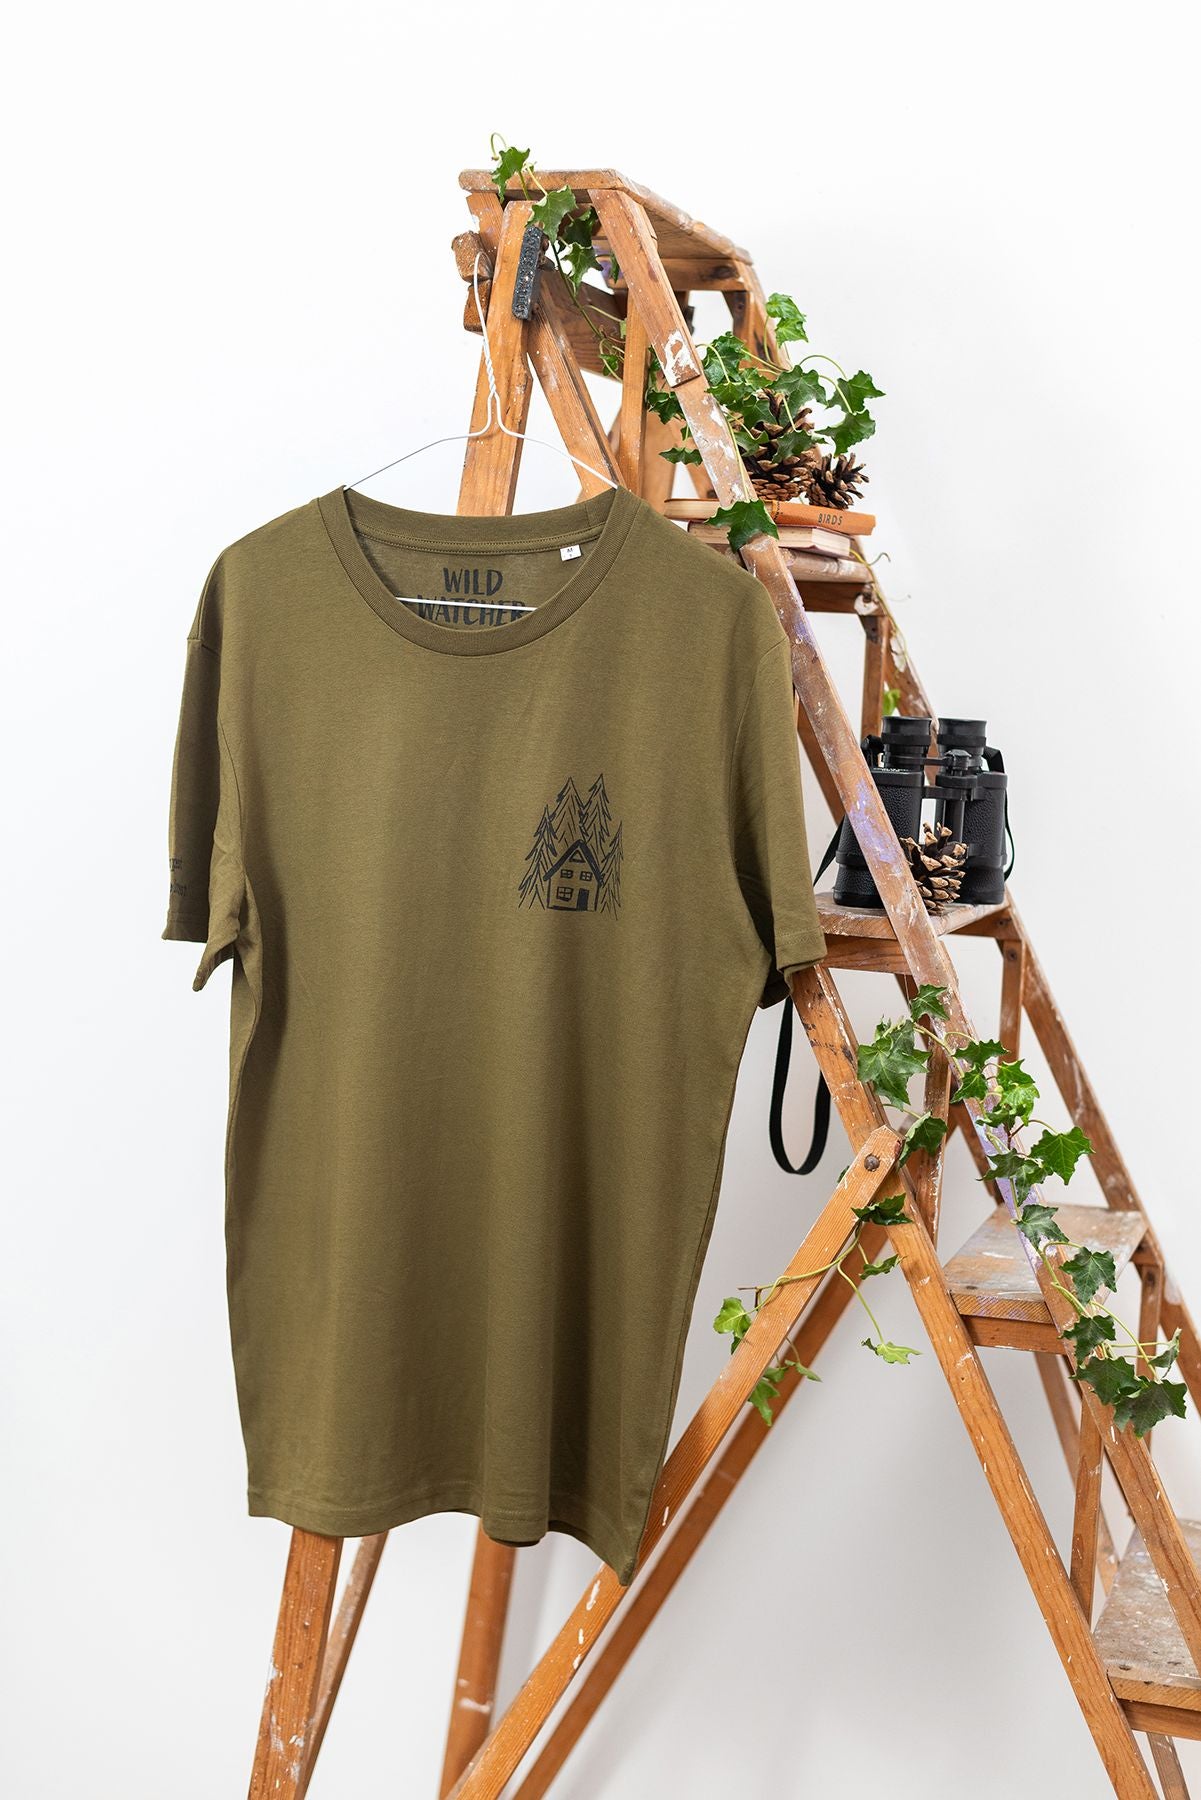 Happiest in the Forest T-shirt